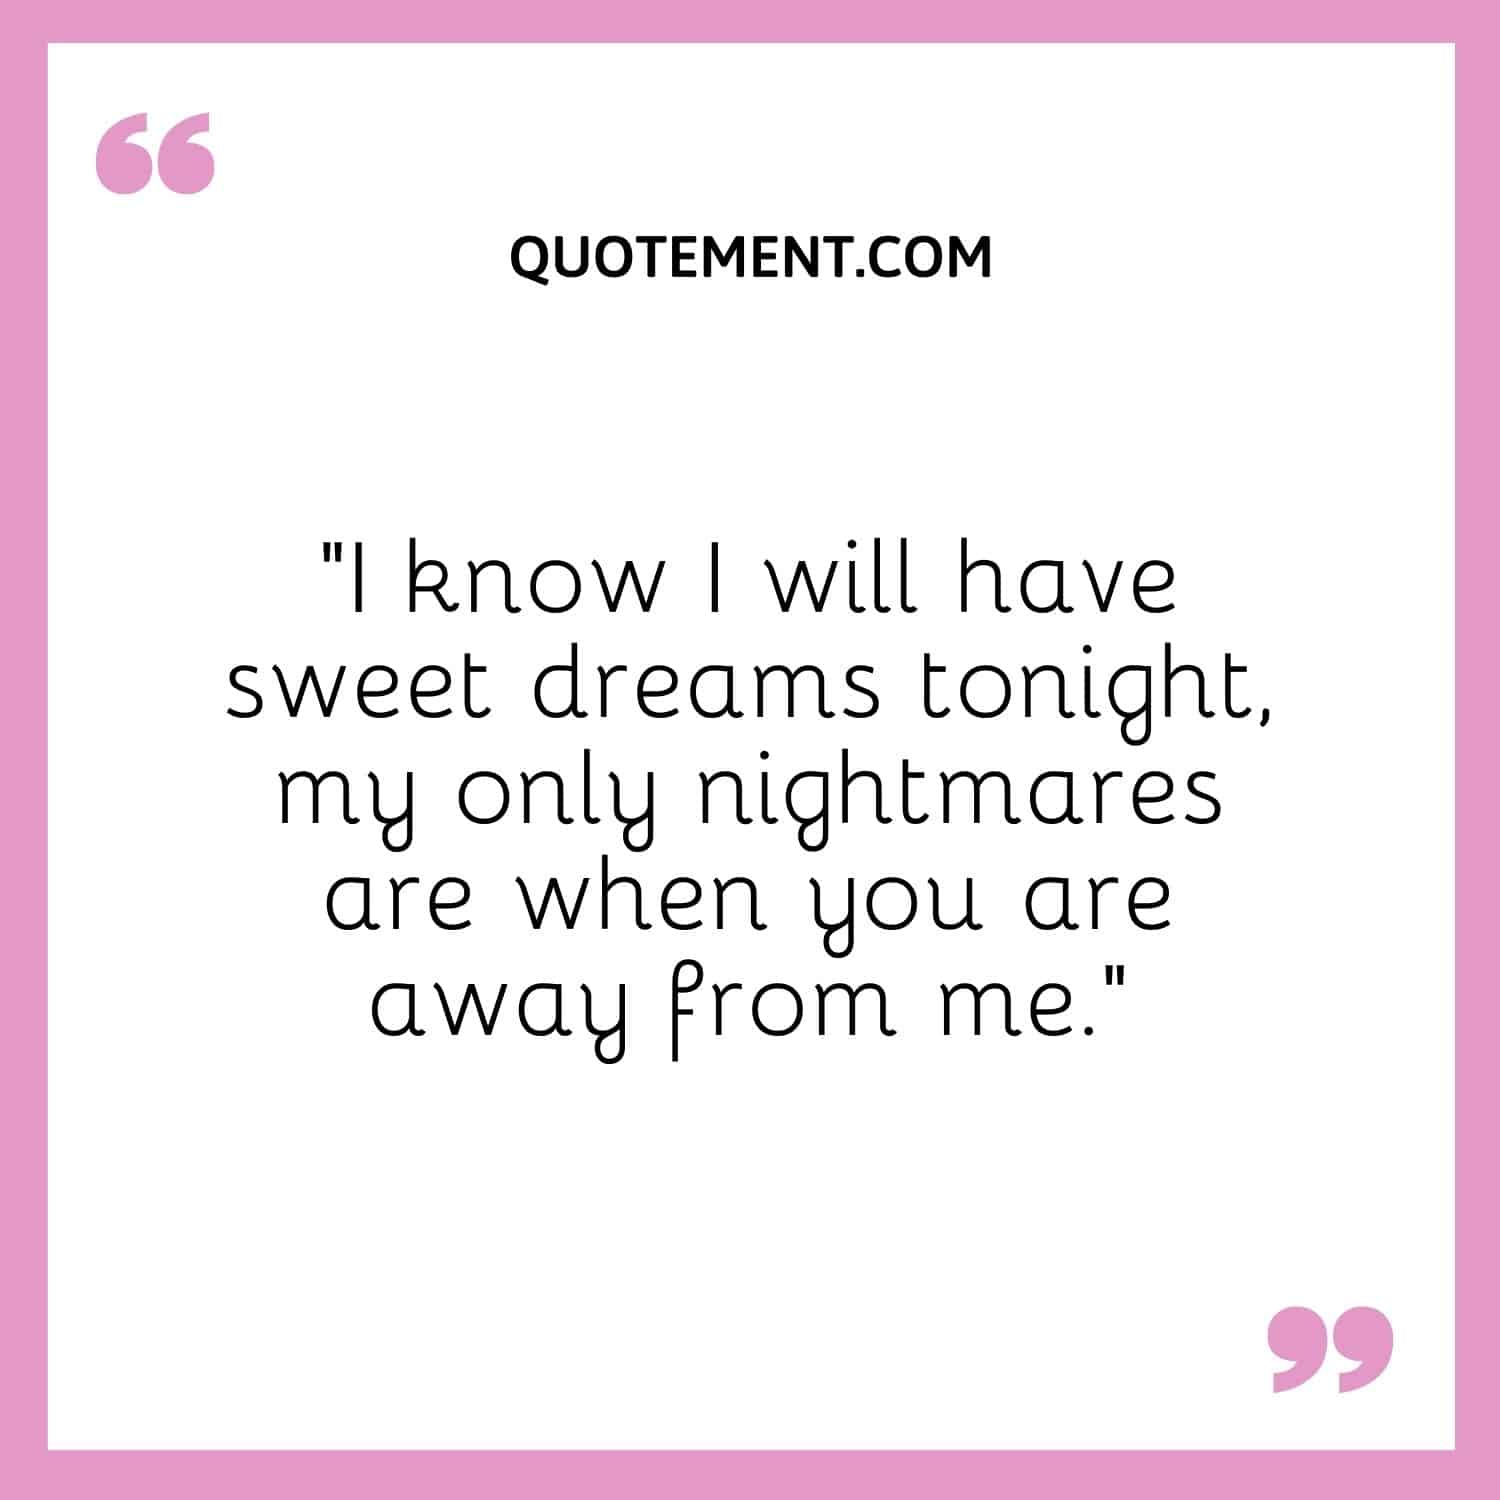 I know I will have sweet dreams tonight, my only nightmares are when you are away from me.